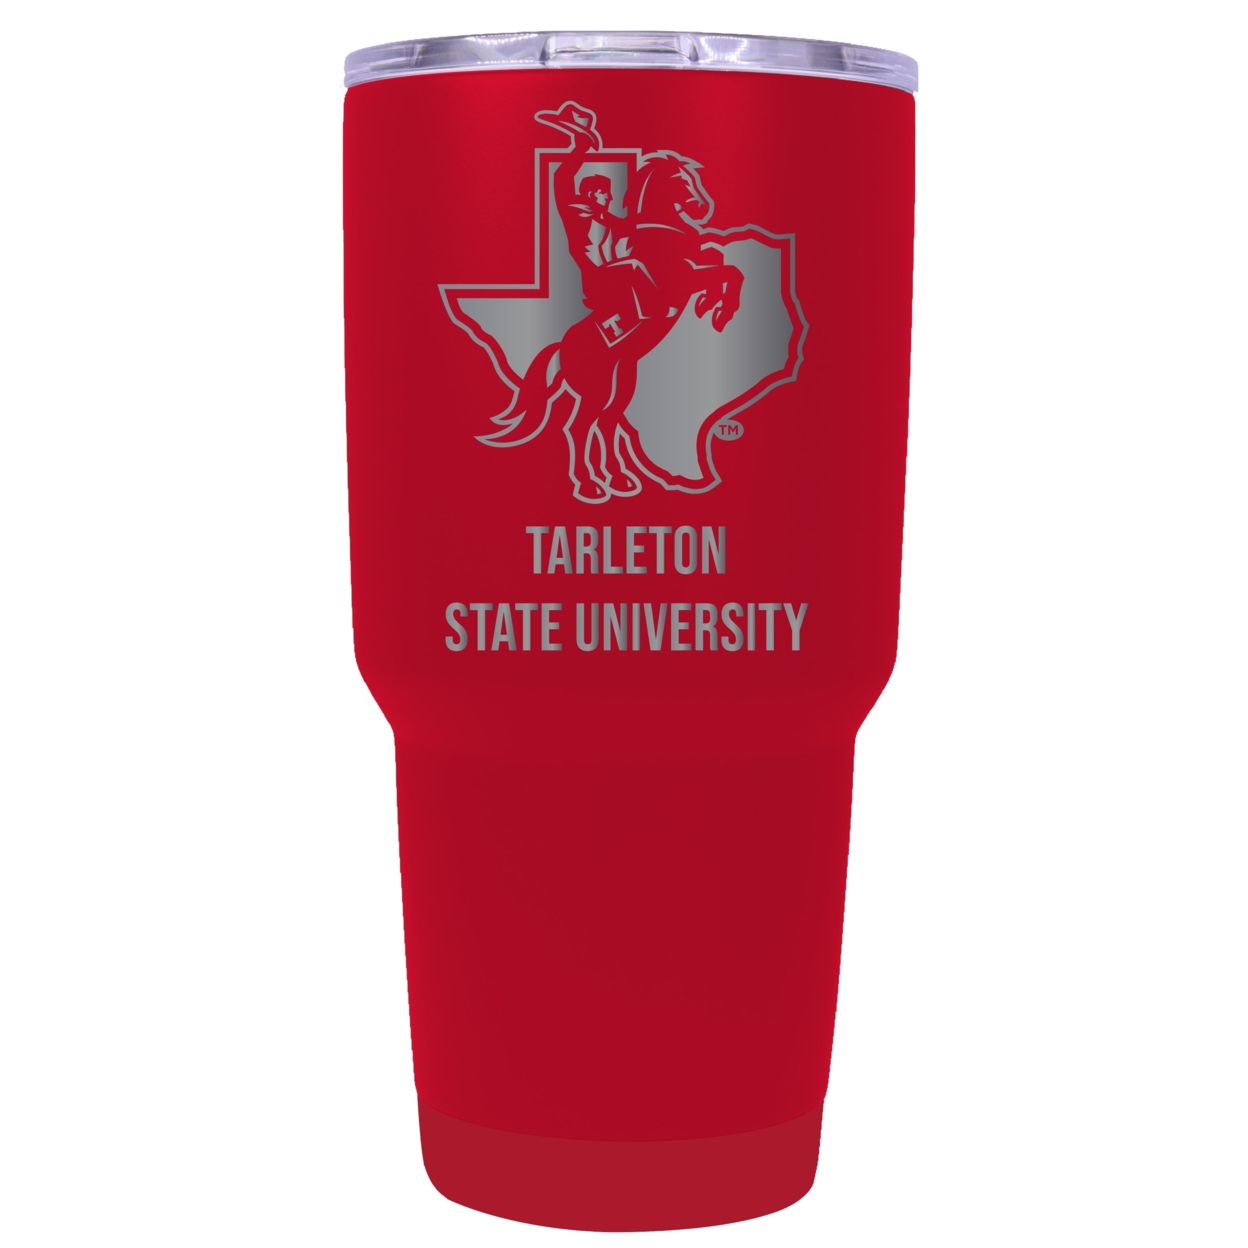 Tarleton State University 24 Oz Laser Engraved Stainless Steel Insulated Tumbler - Choose Your Color. - Coral